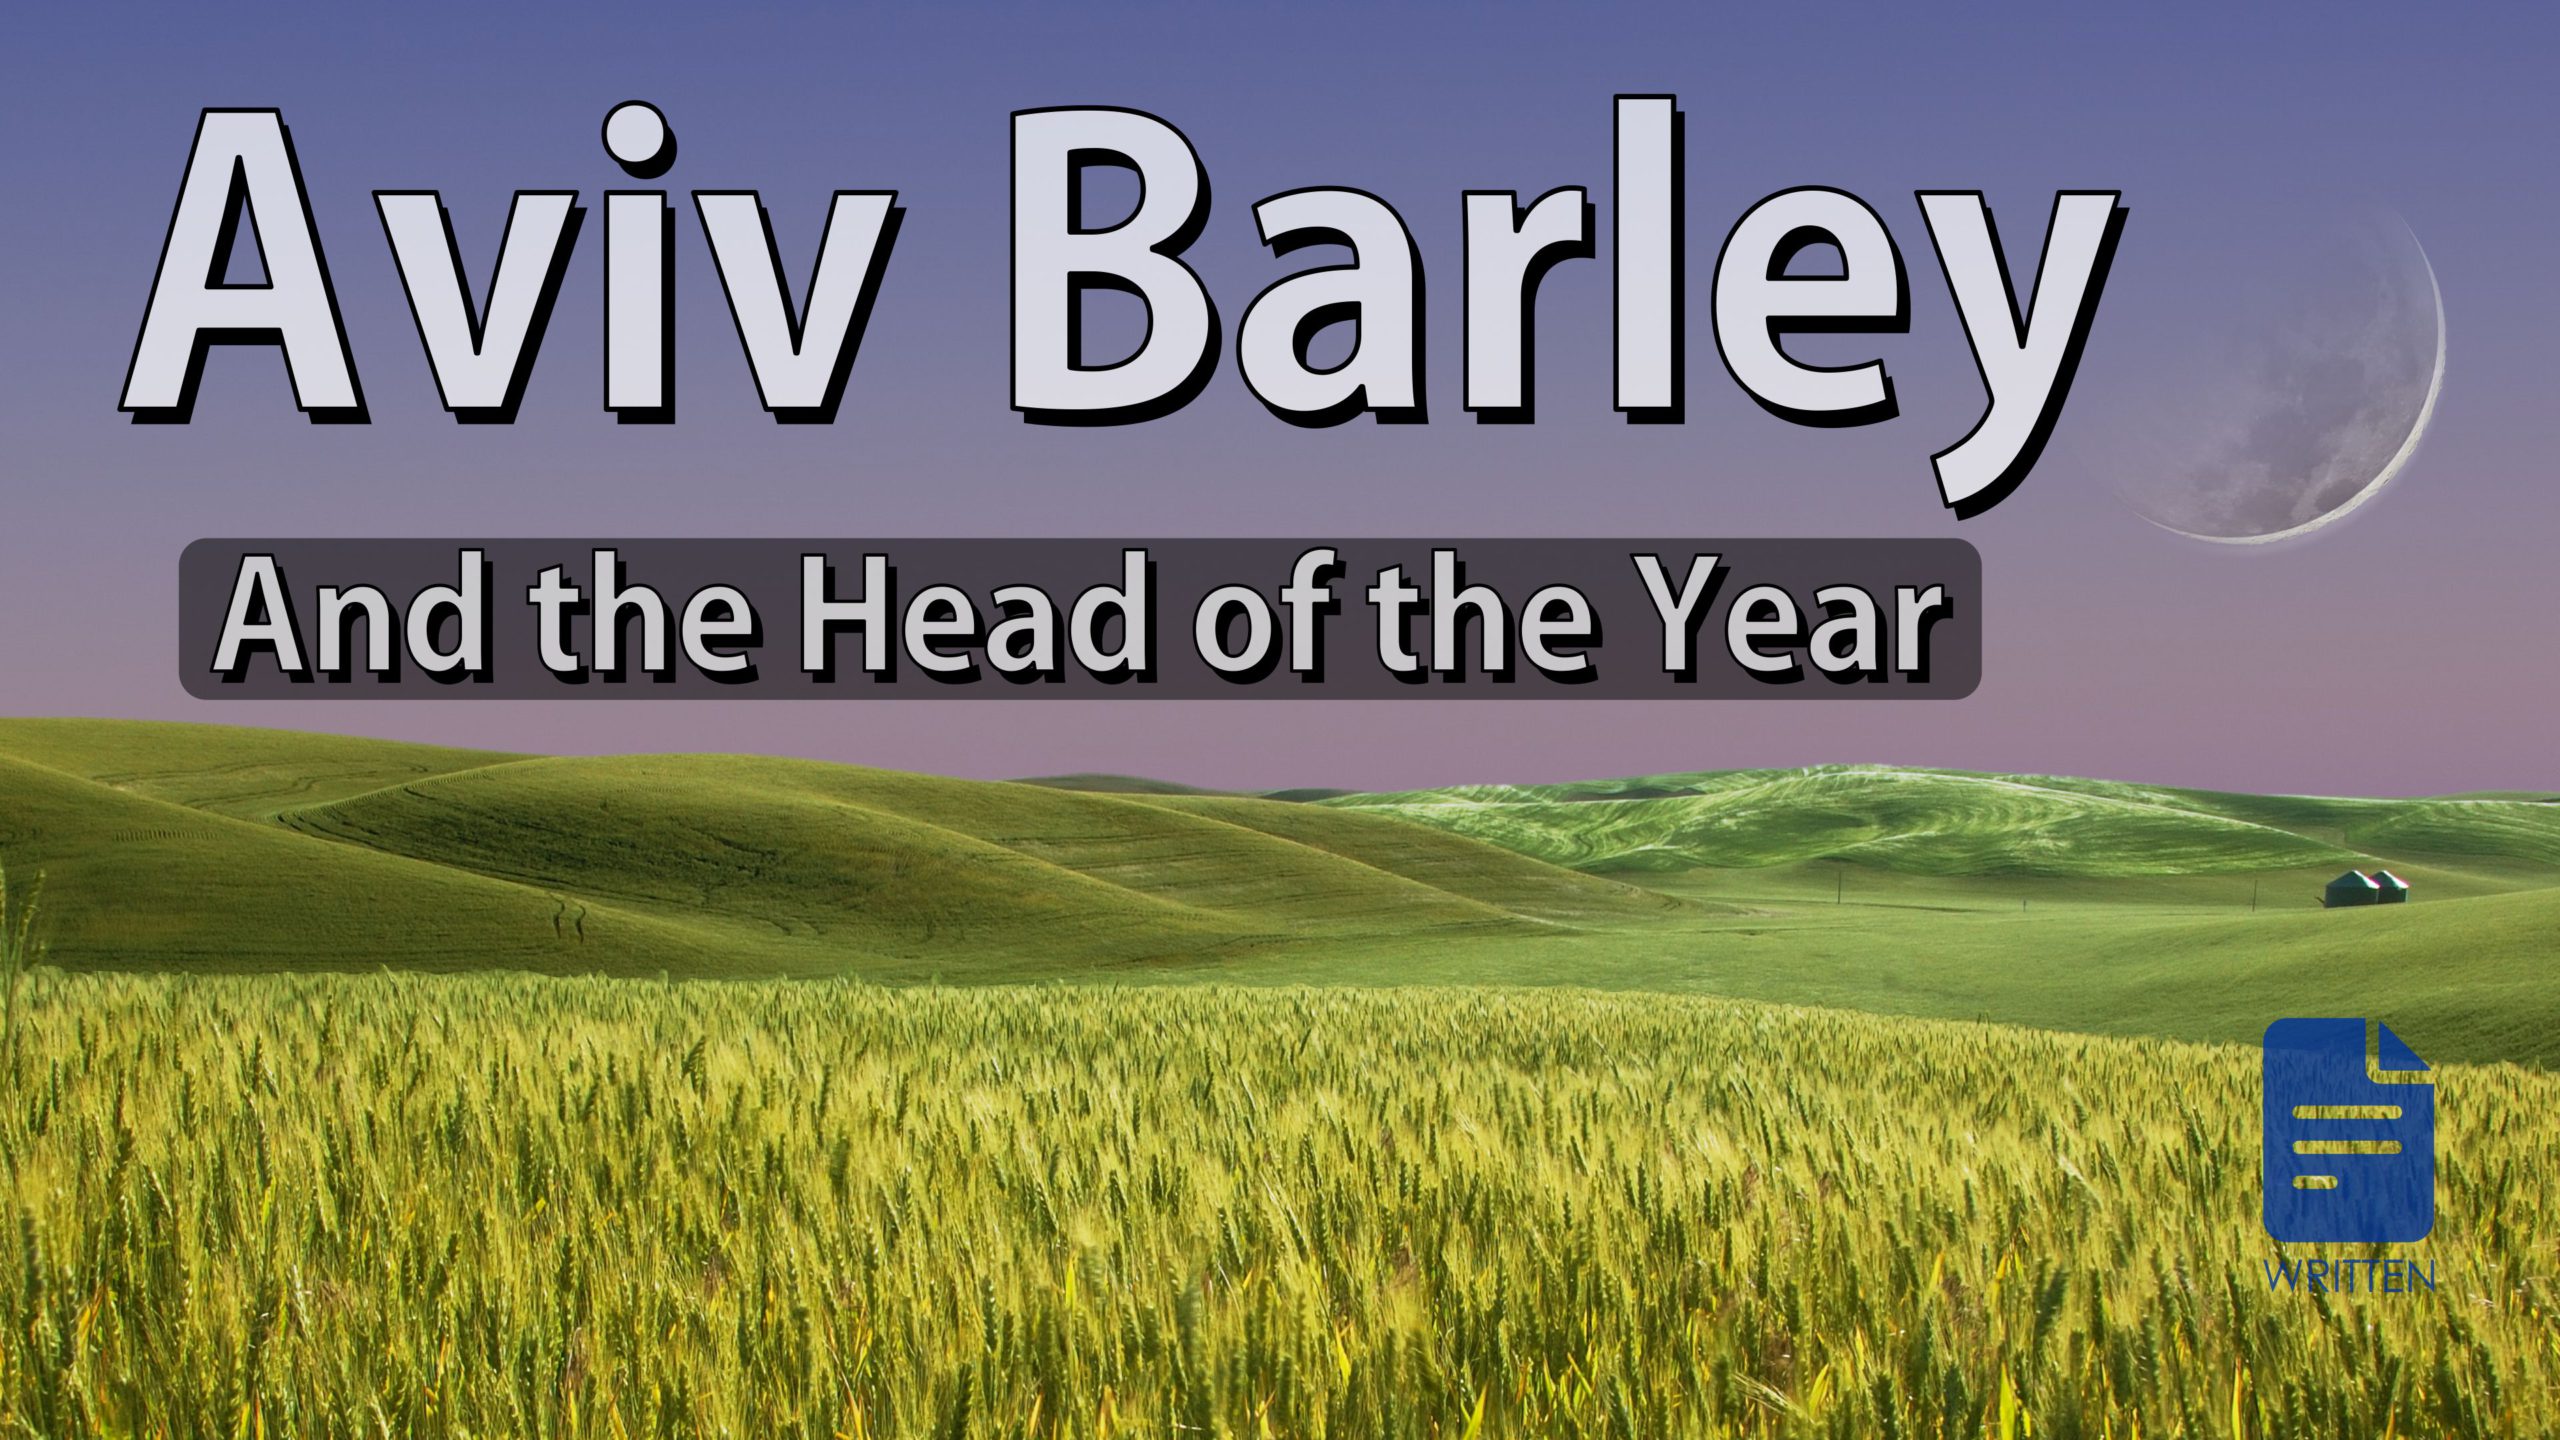 Aviv Barley and the Head of the Year